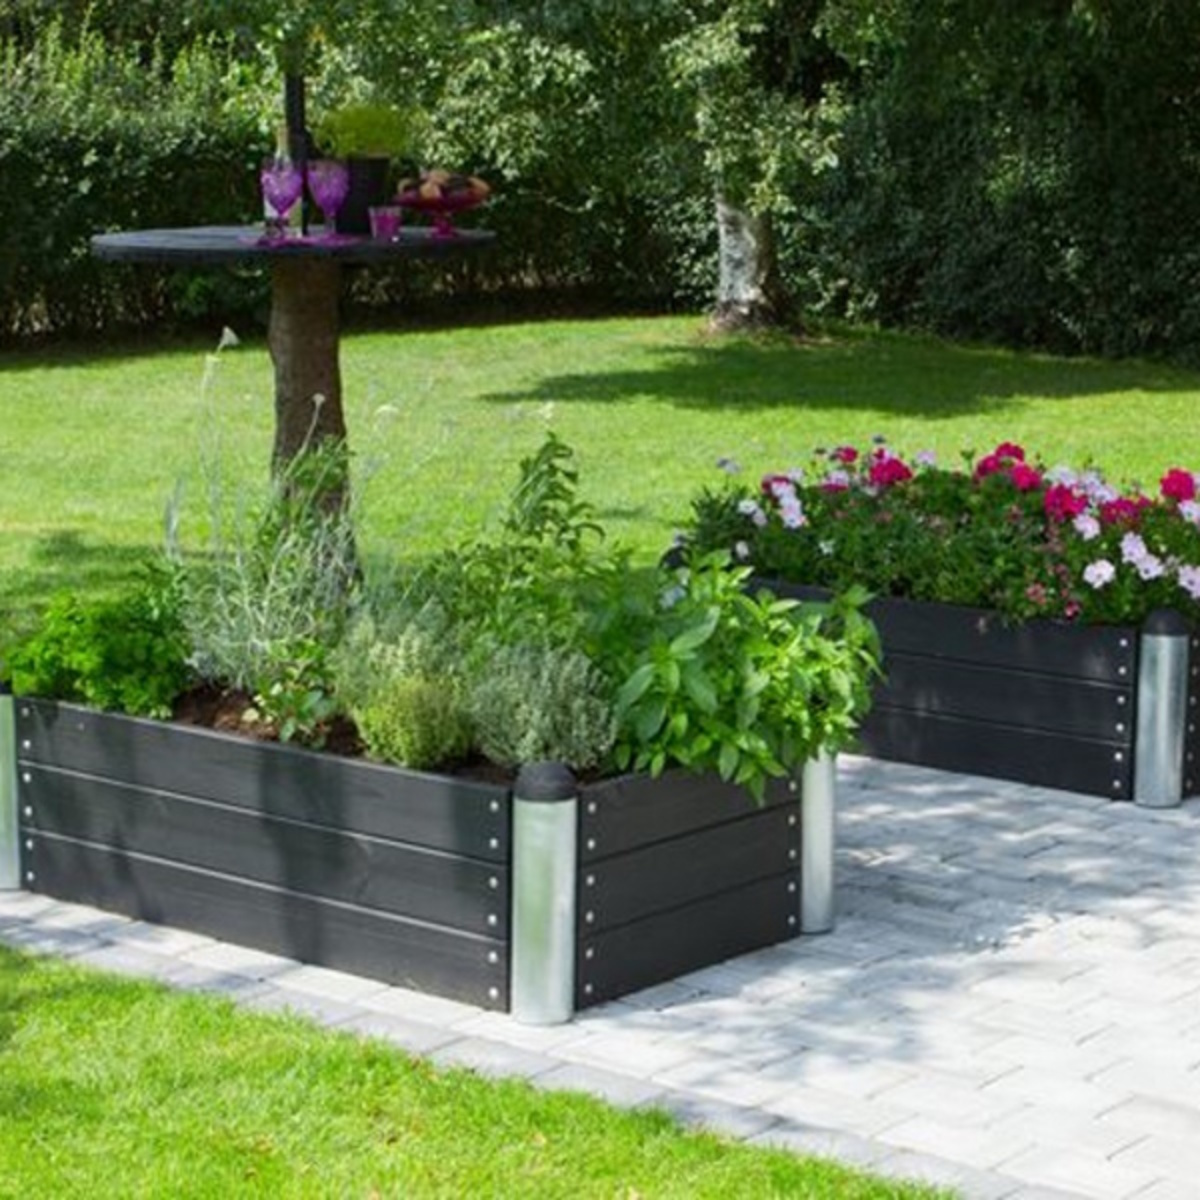 Raised planter boxes from wood and galvanized steel